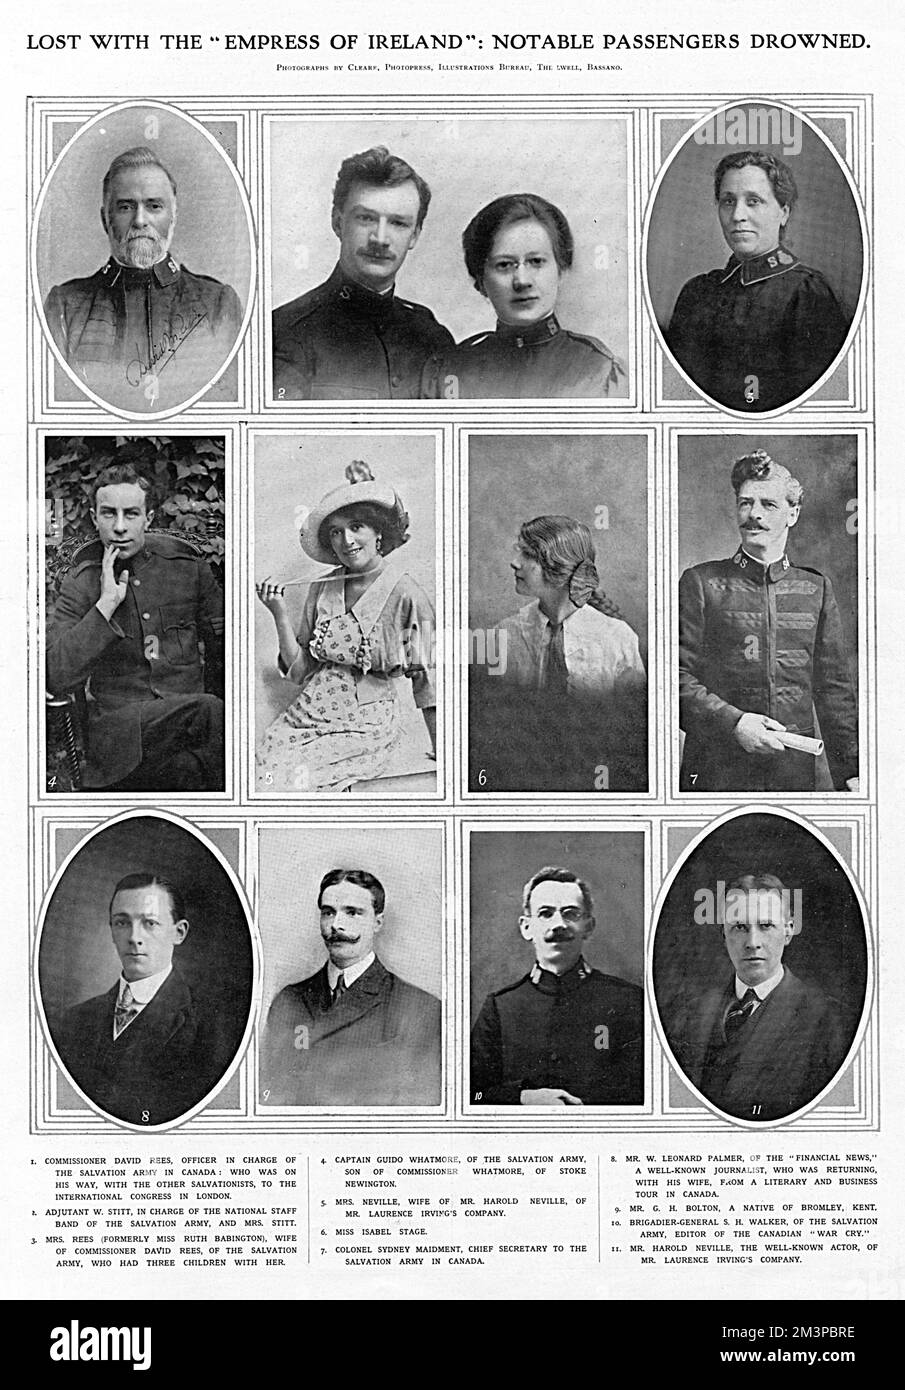 Lost with the Empress of Ireland: notable passengers drowned. 1. Commissioner David Rees, in charge of the Salvation Army in Canada; 2. Adjutant W Stitt, of the Salvation Army, and Mrs Stitt; 3. Mrs Rees, wife of David Rees; 4. Captain Guido Whatmore of the Salvation Army; 5. Mrs Neville, wife of Harold Neville of Laurence Irving's company; 6. Miss Isabel Stage; 7. Colonel Sydney Maidment, chief secretary to the Salvation Army in Canada; 8. Mr W Leonard Palmer, journalist; 9. Mr G H Bolton; 10. Brigadier-General S H Walker of the Salvation Army; 11. Mr Harold Neville, the well-known actor, of Stock Photo